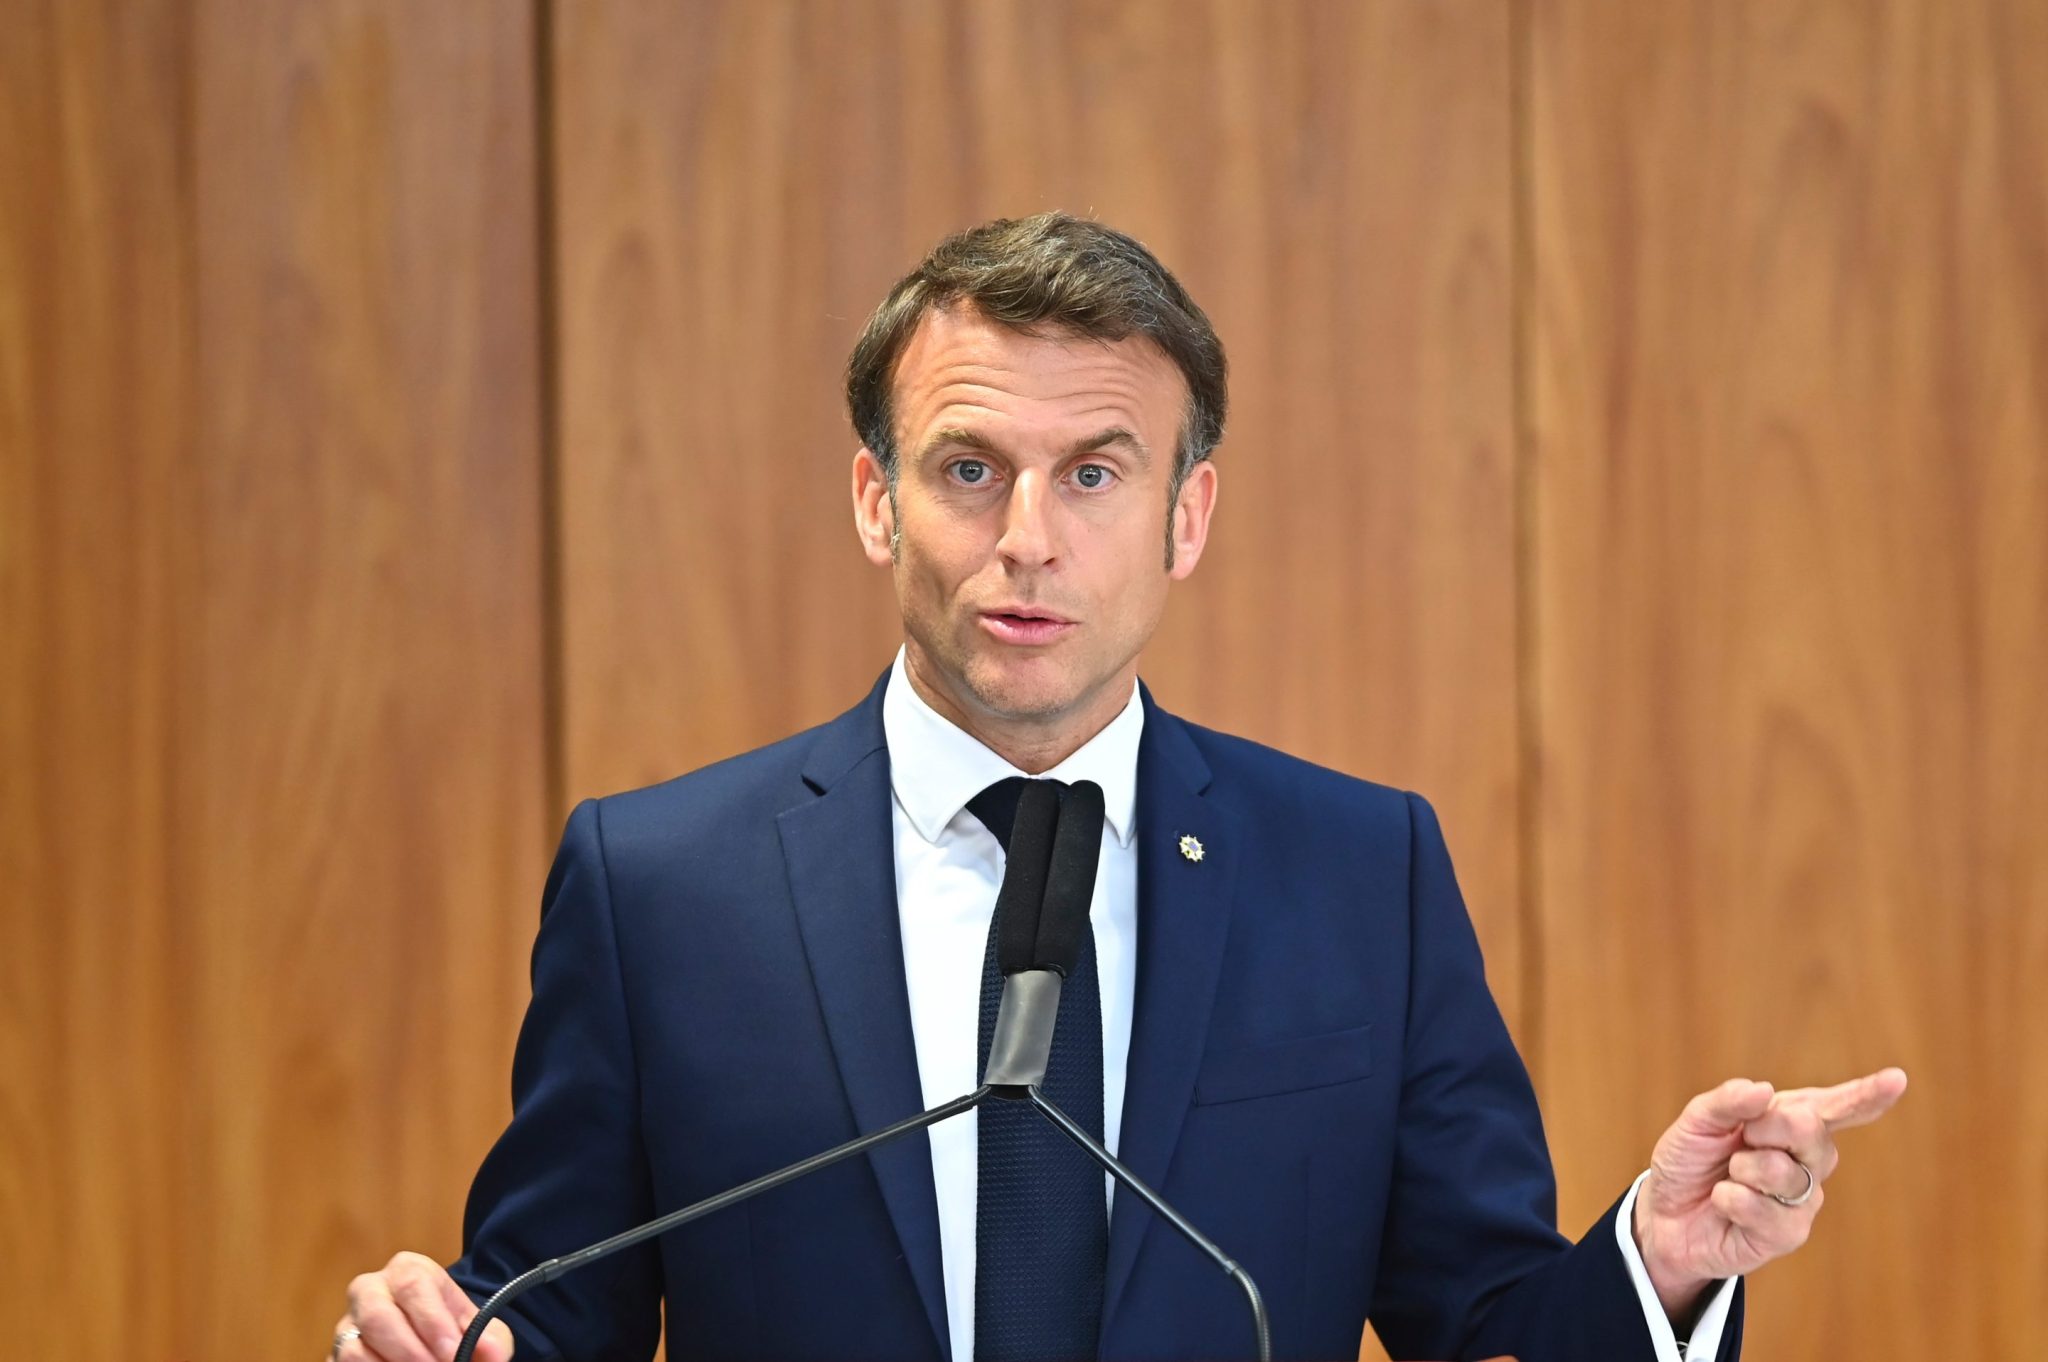 French president Macron is urging his people and Western allies to boost military: ‘This has been a real revolution in recent years, and it’s a revolution that has been pushed forward by France’